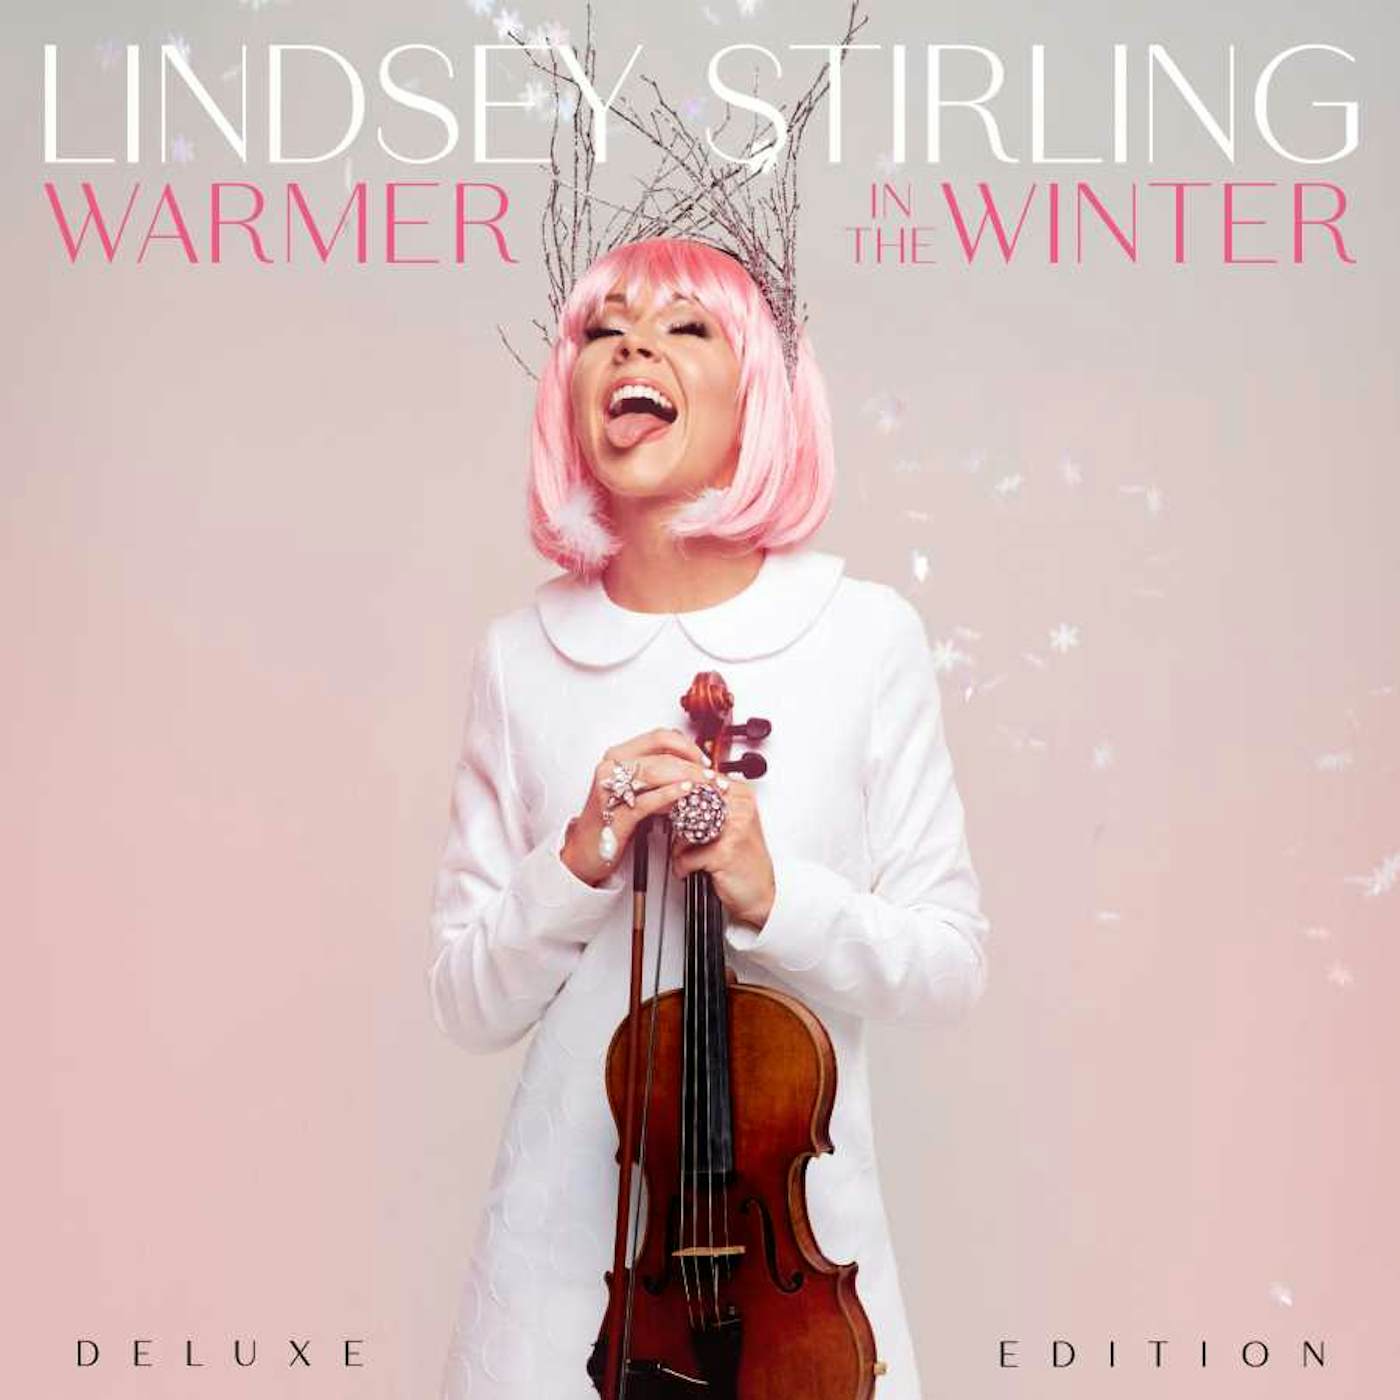 Lindsey Stirling WARMER IN THE WINTER (2 LP DELUXE) Vinyl Record